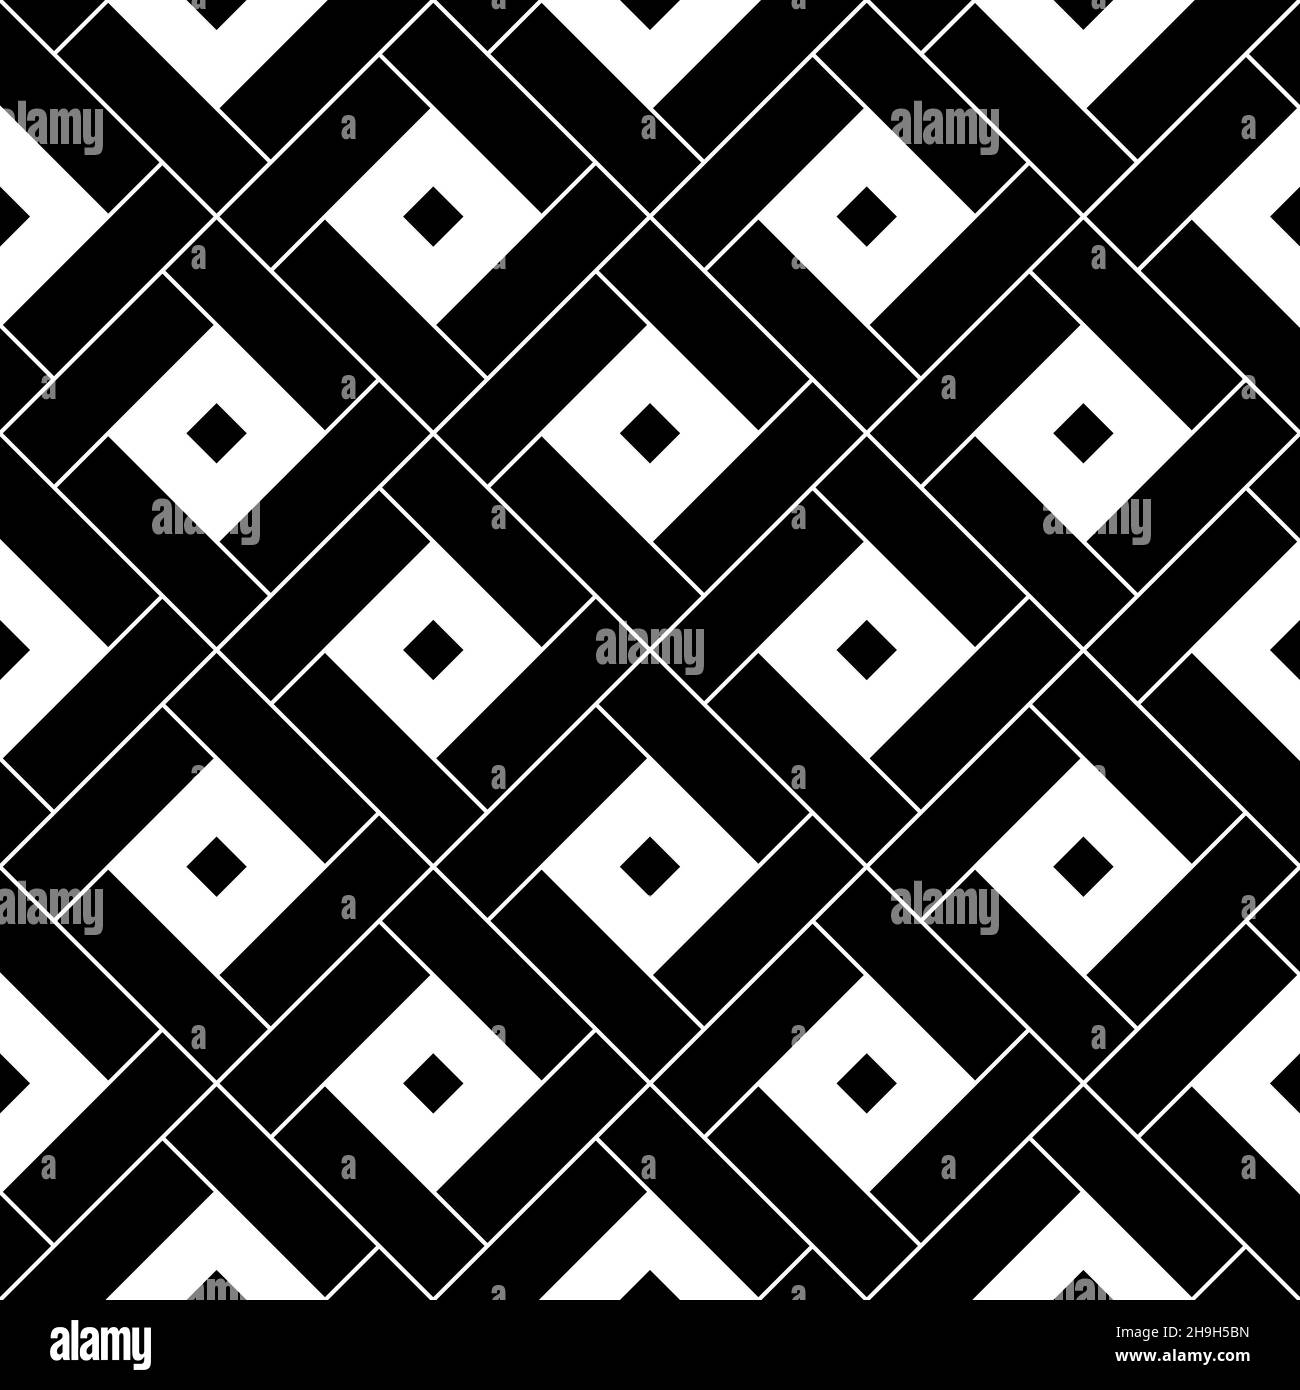 Squares tessellation vector. Pythagorean diagonal tiling. Repeated white checks on black background Stock Vector